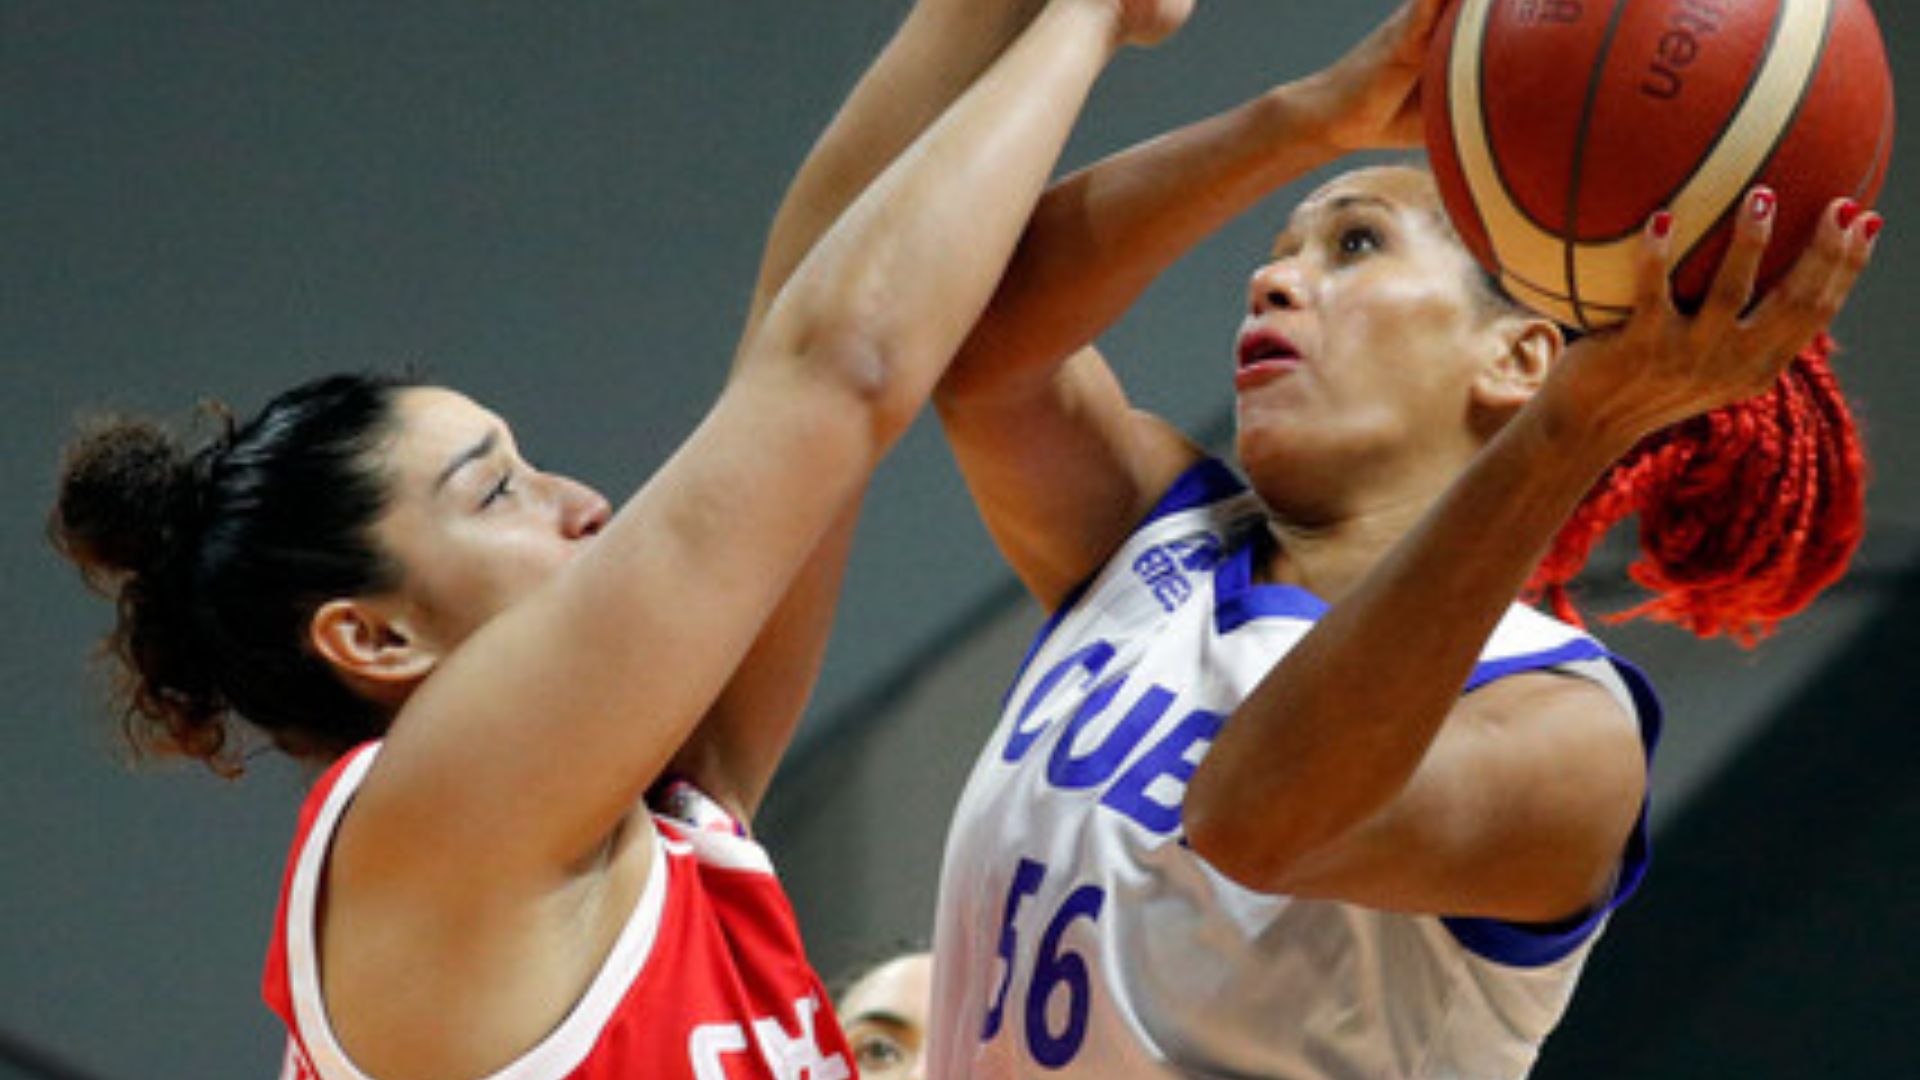 Chile can not overcome Cuba in women's basketball